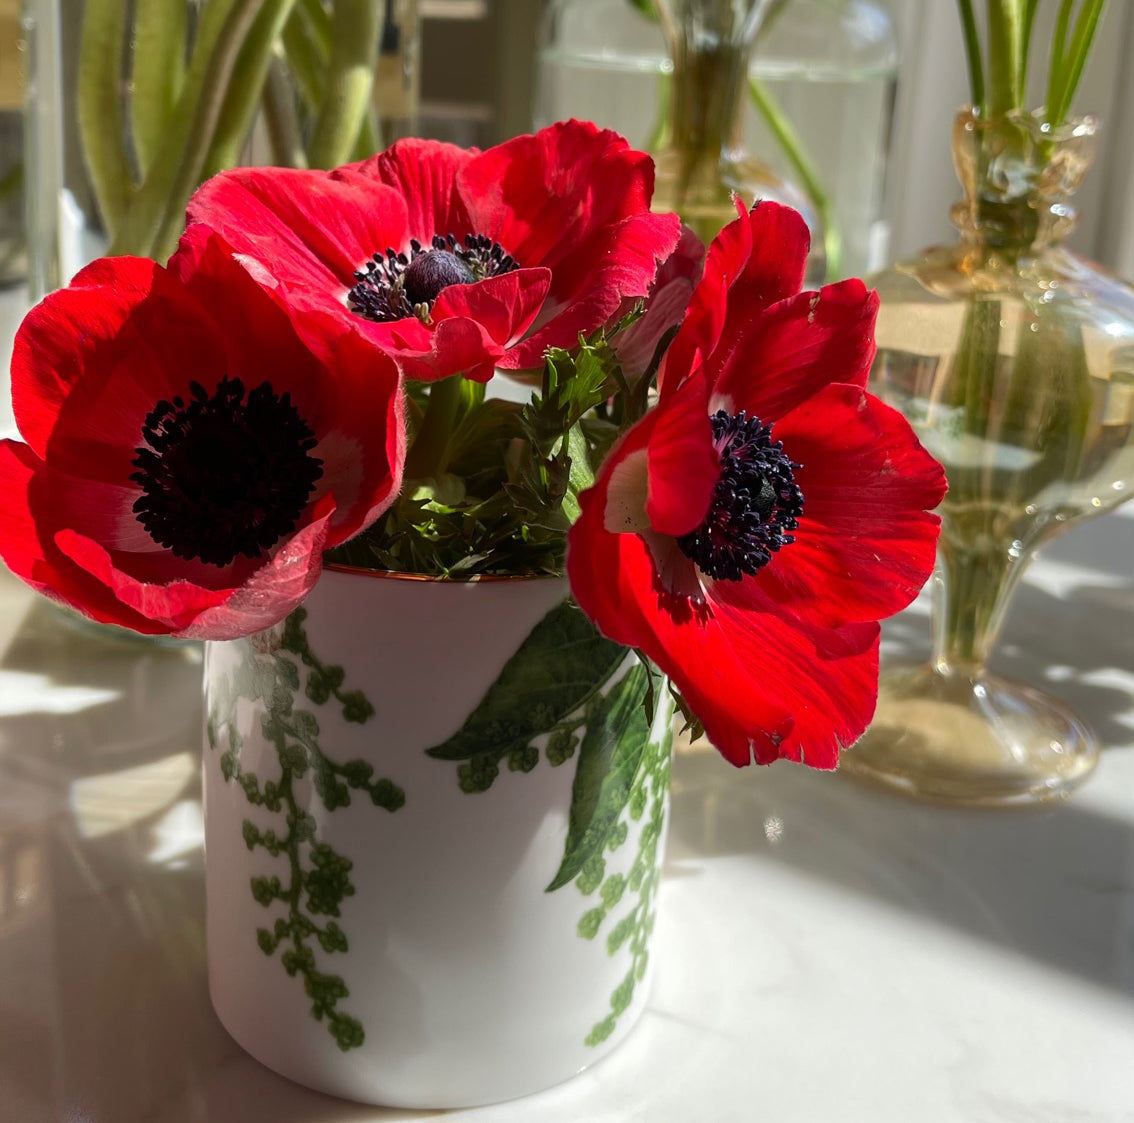 Creative Reincarnations: 6 Of The Best Ways To Use and Re-Use Our English Fine Bone China Pots